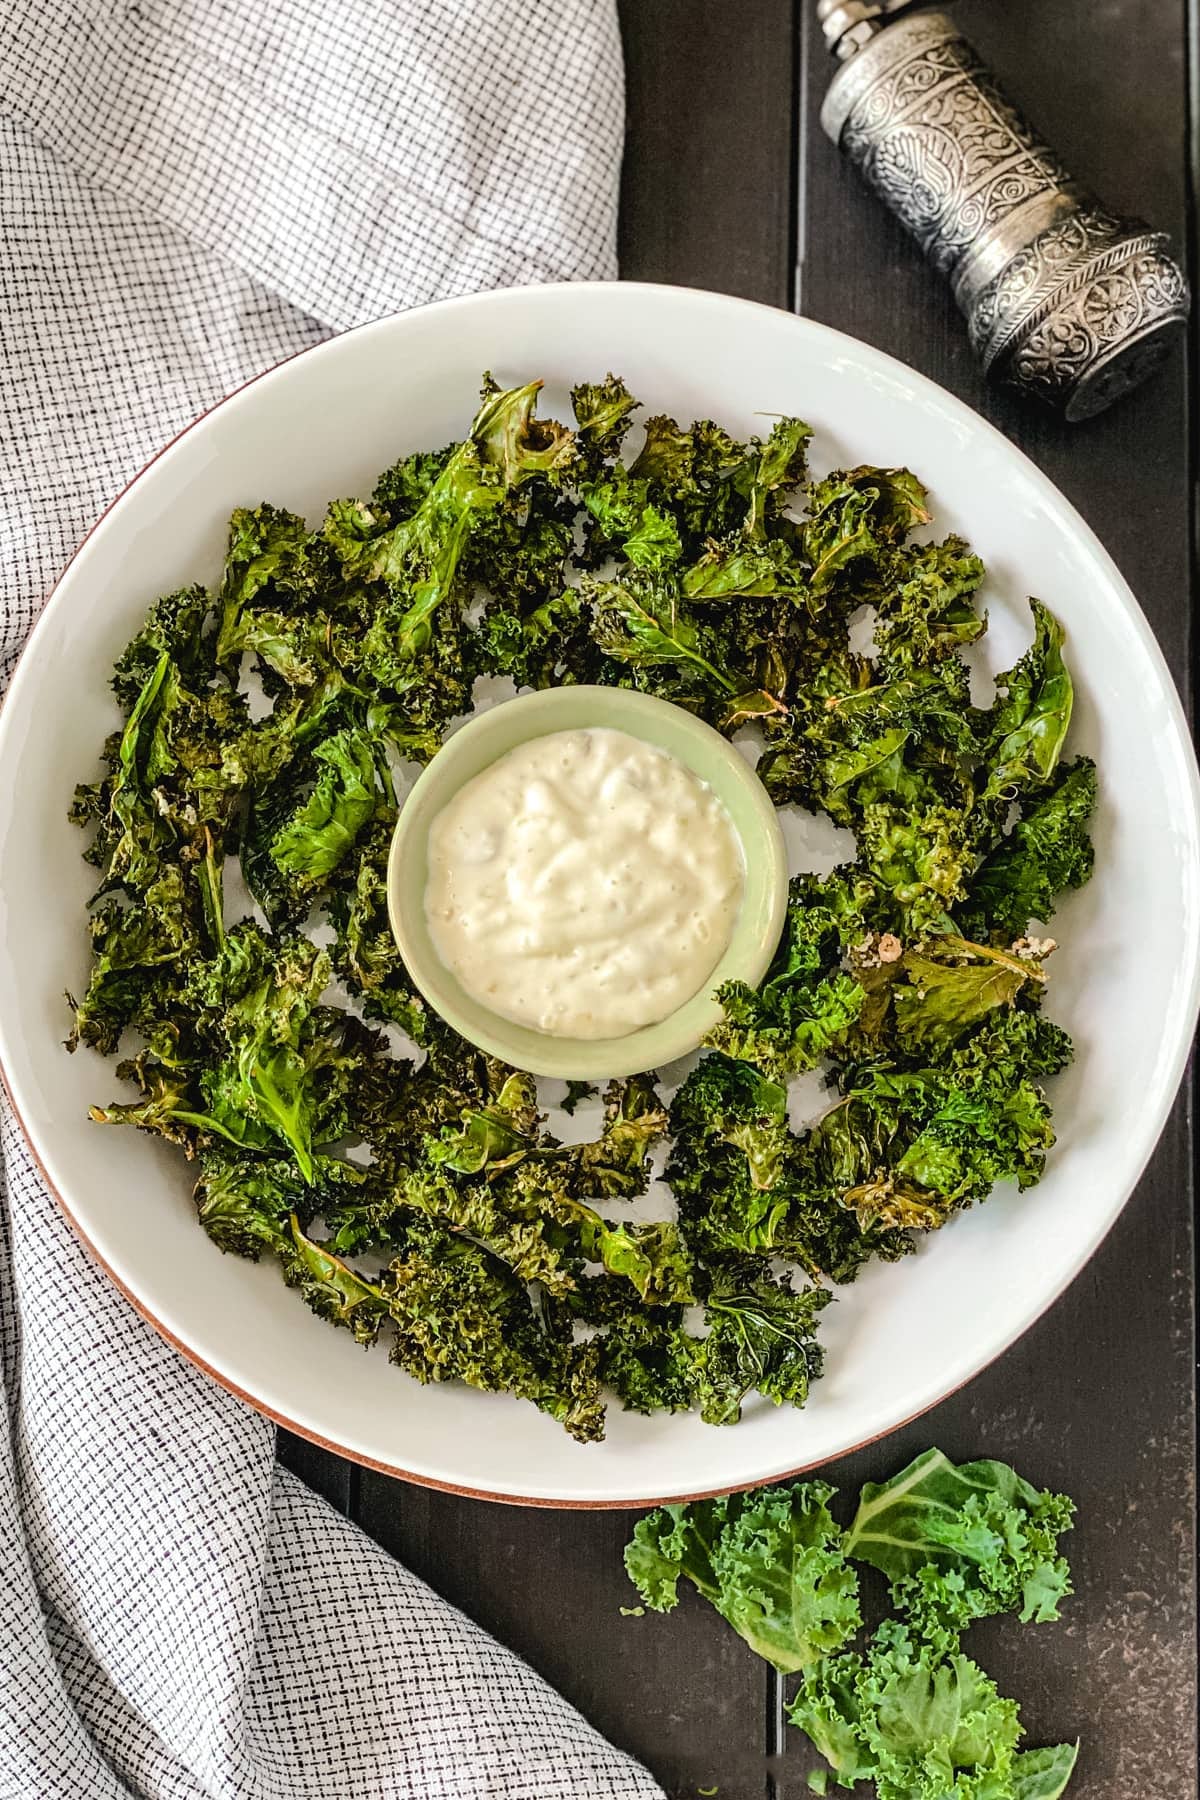 Spicy air fryer kale chips